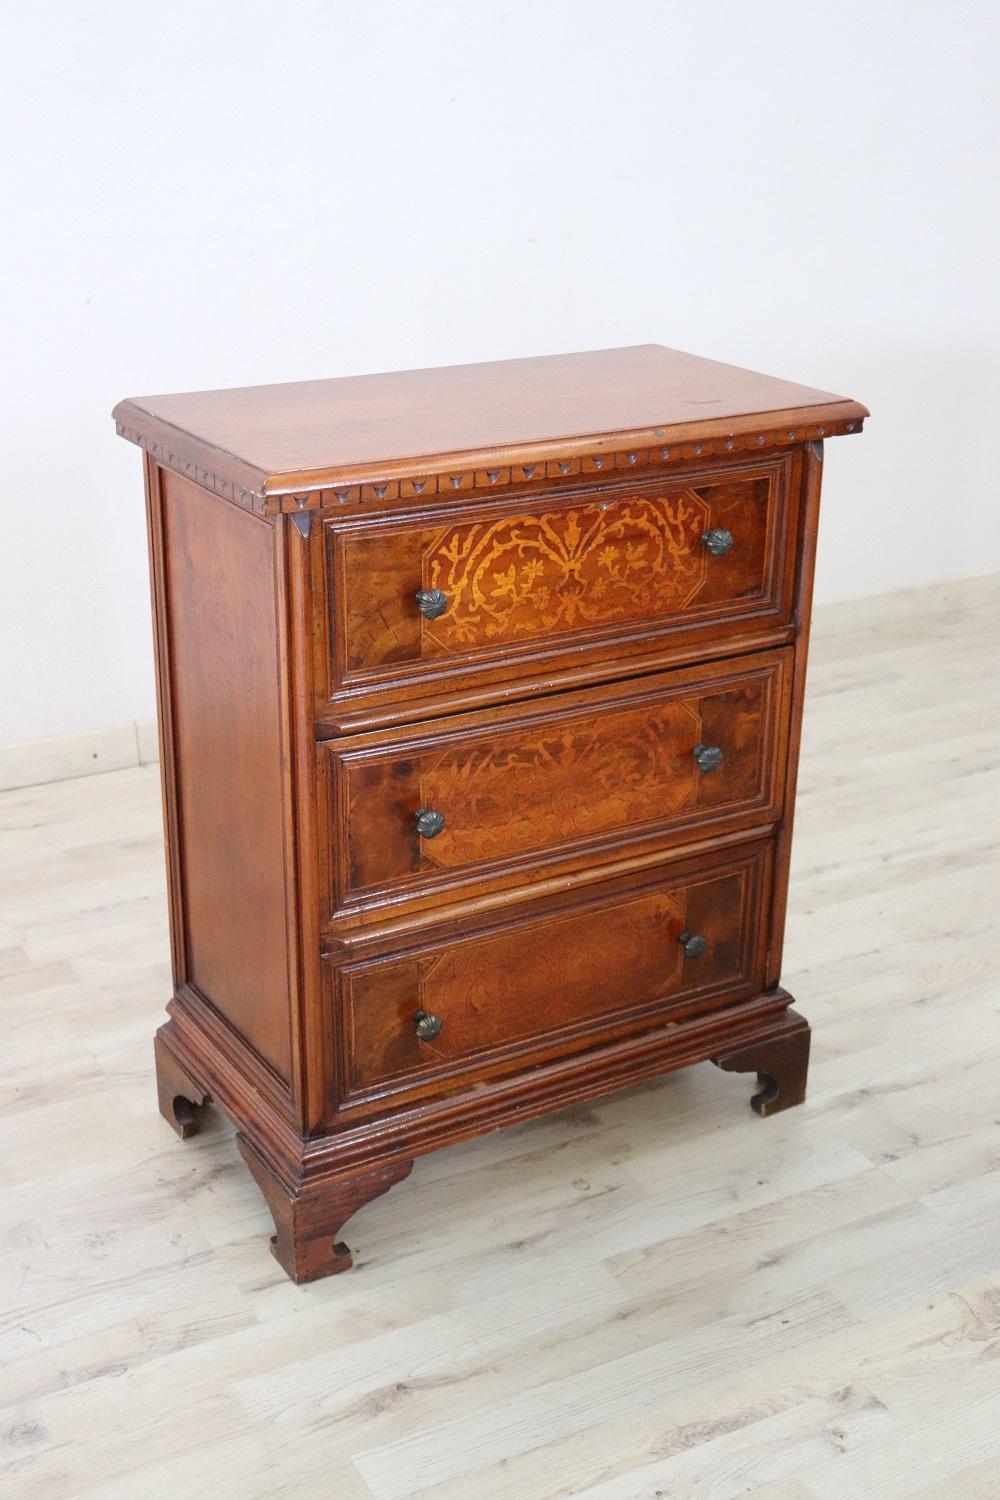 Rare and fine quality Italian Louis XIV style 1950s small chest of drawer in walnut wood. On the front three comfortable drawers. The front of the drawers is characterized by refined wood inlay work. In goods conditions.